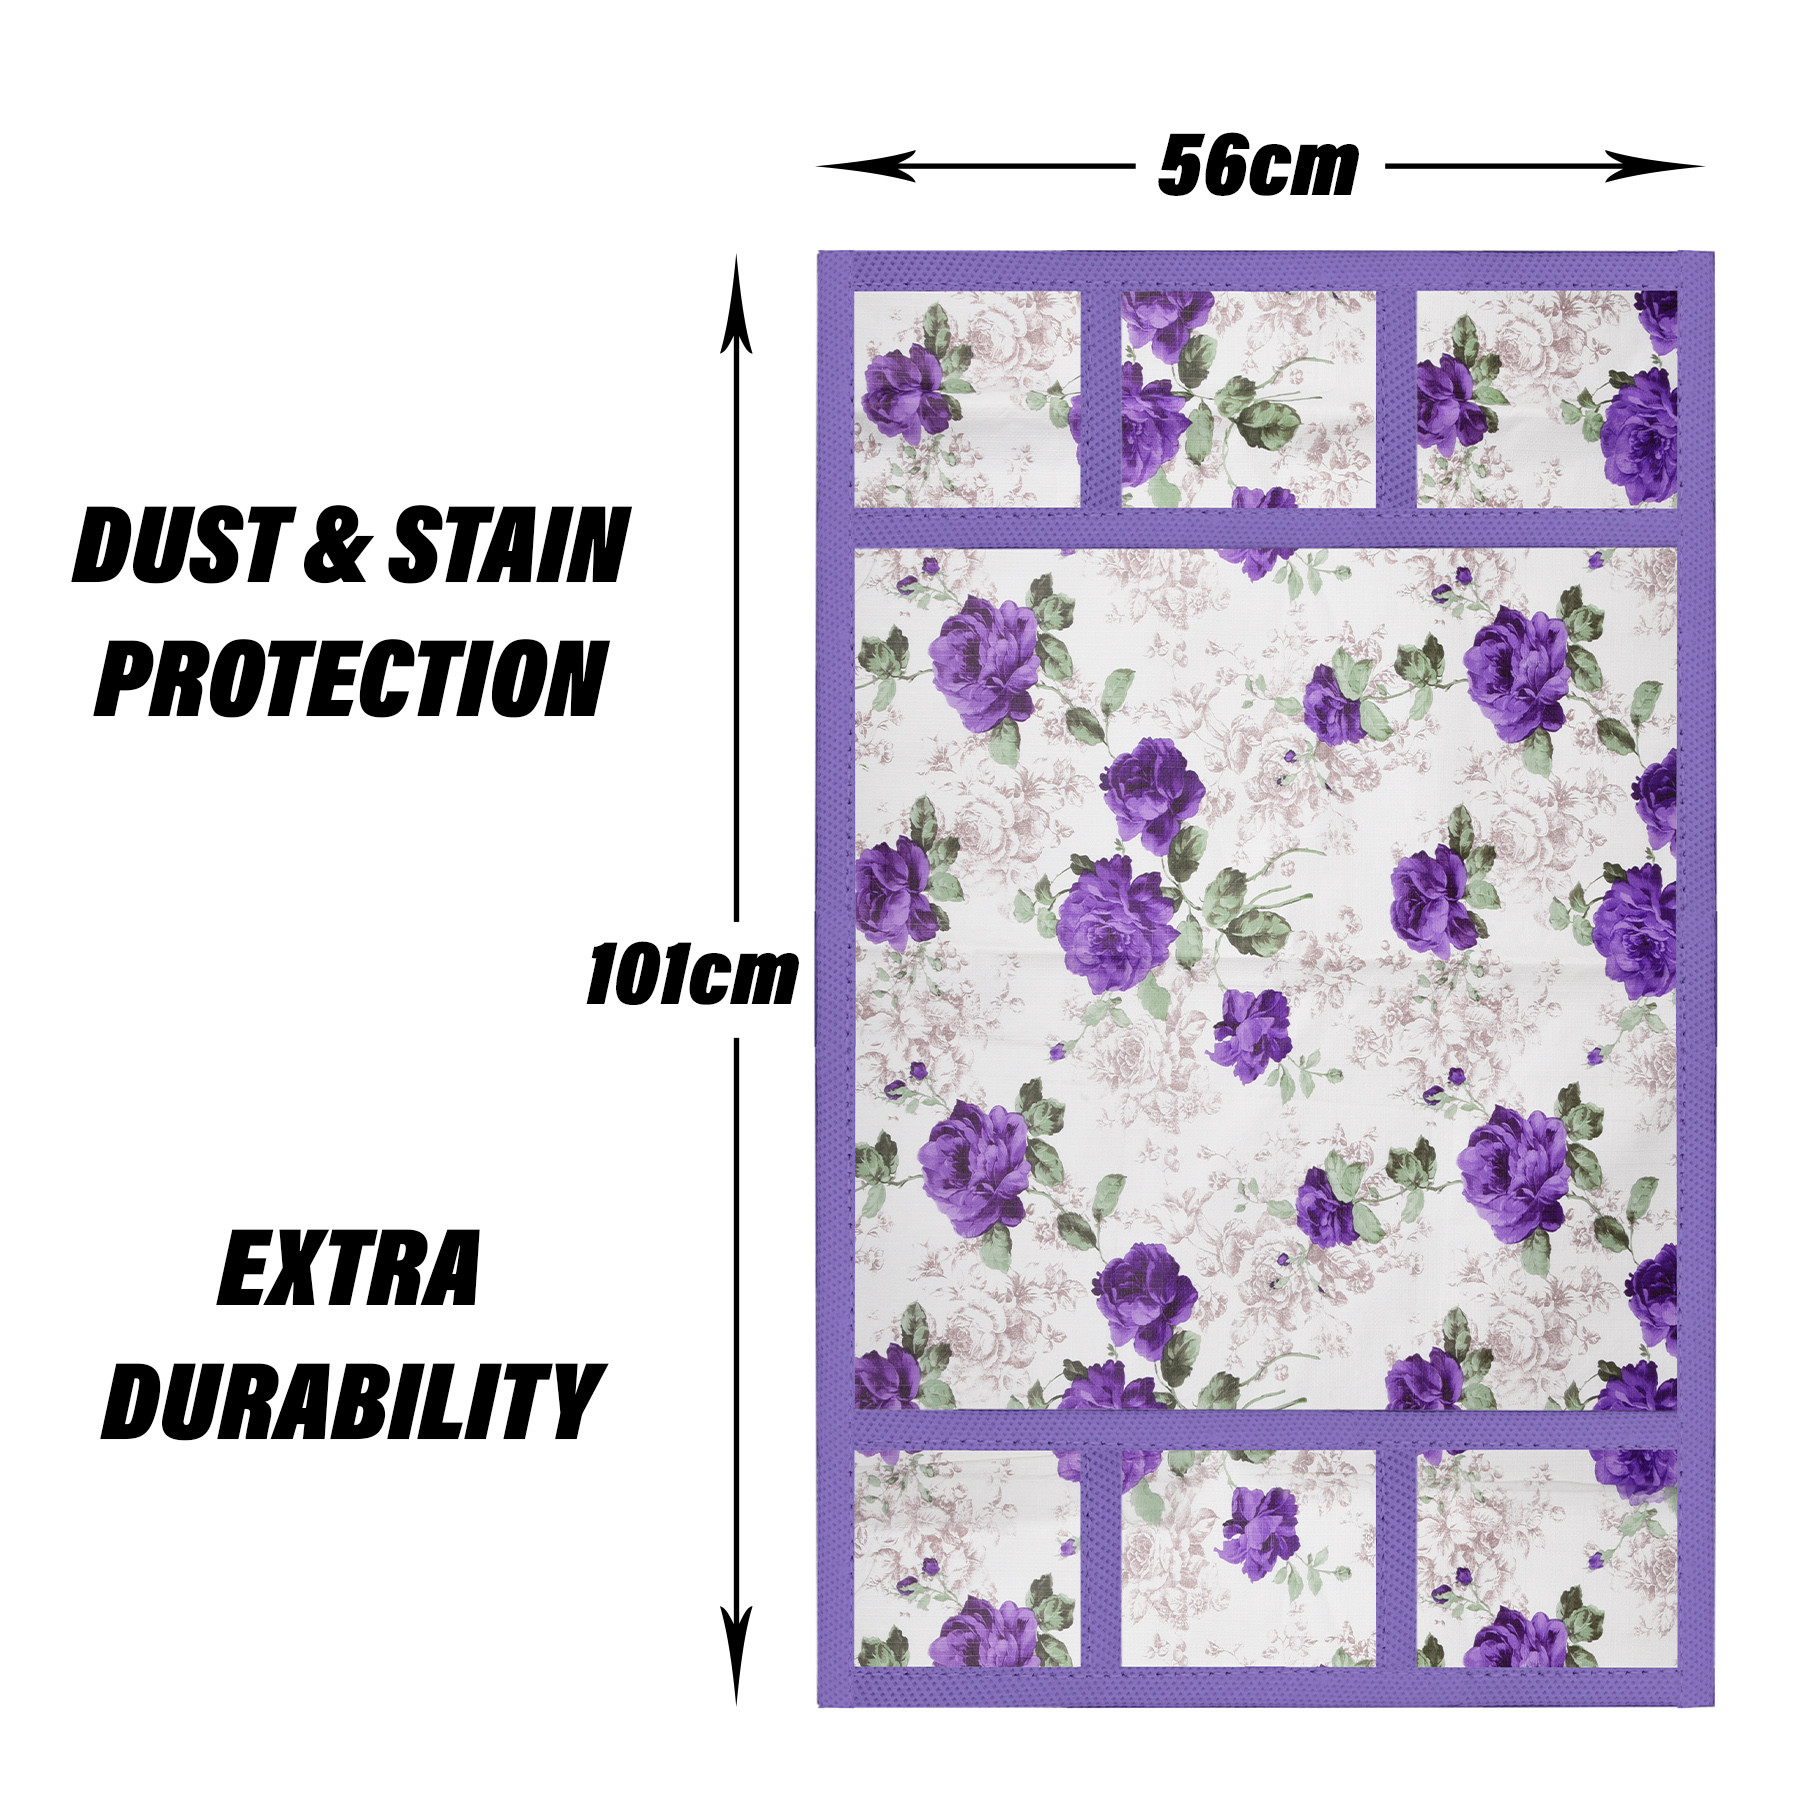 Kuber Industries Fridge Top Cover | PVC Fridge Top Cover | Purple Flower Fridge Top Cover | Refrigerator Cover with 6 Side Pockets | Refrigerator Top Protector | Appliance Cover | White